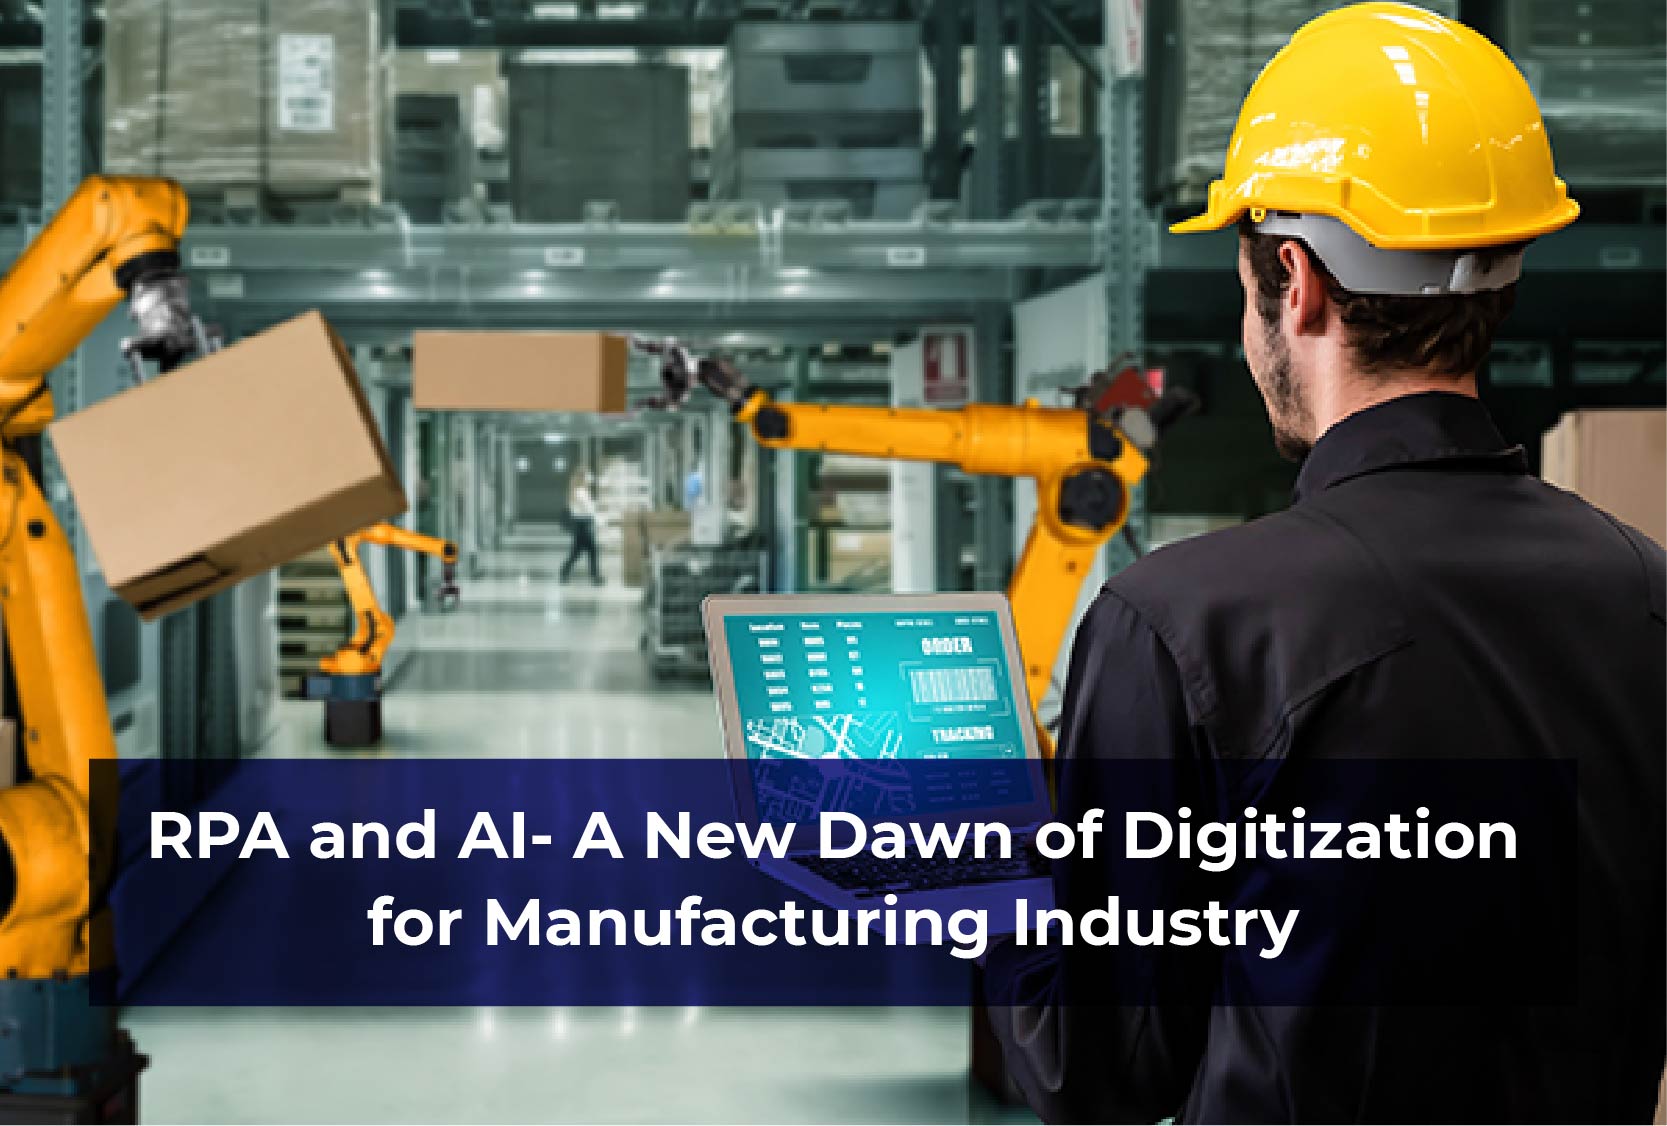 RPA and AI- A New Dawn of Digitization for Manufacturing Industry